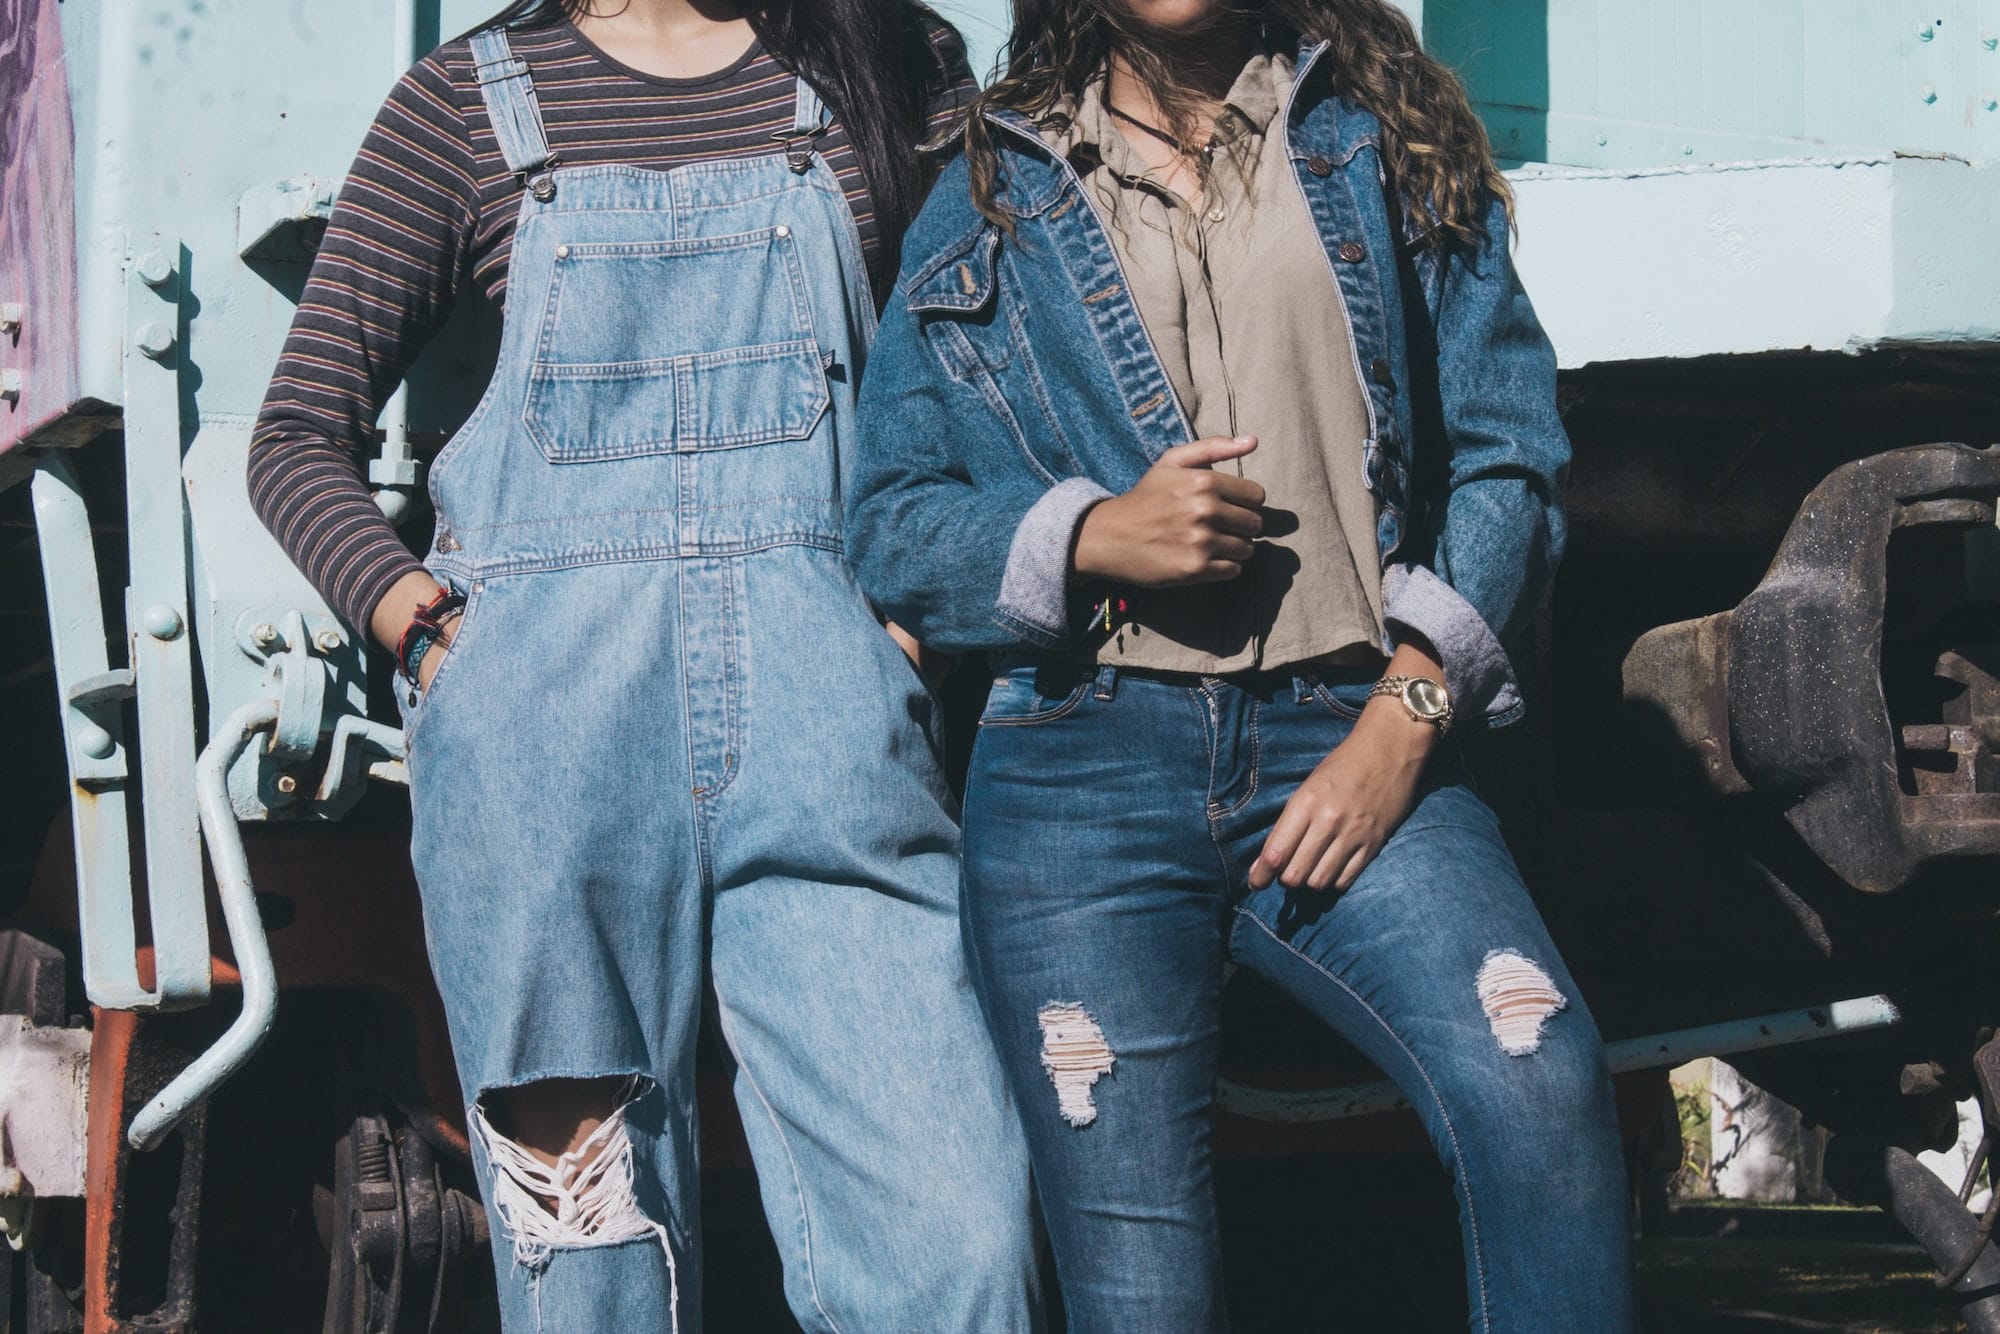 The Denim Trends We're Indulging In This Summer  Denim trends, Fashion,  Daily fashion inspiration